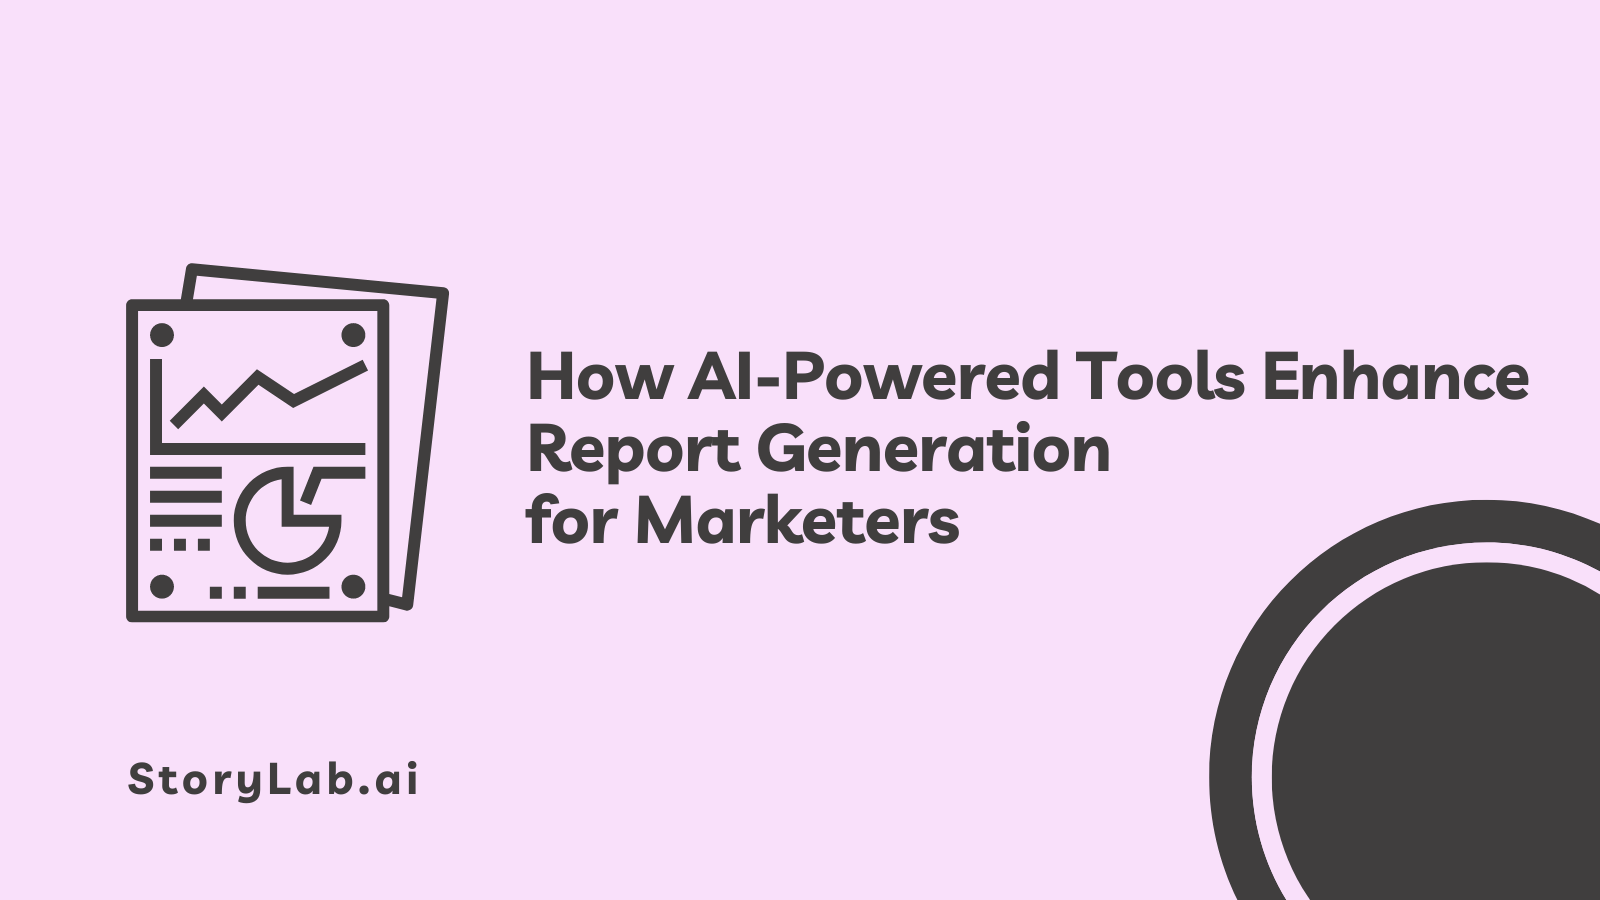 How AI-Powered Tools Enhance Report Generation for Marketers